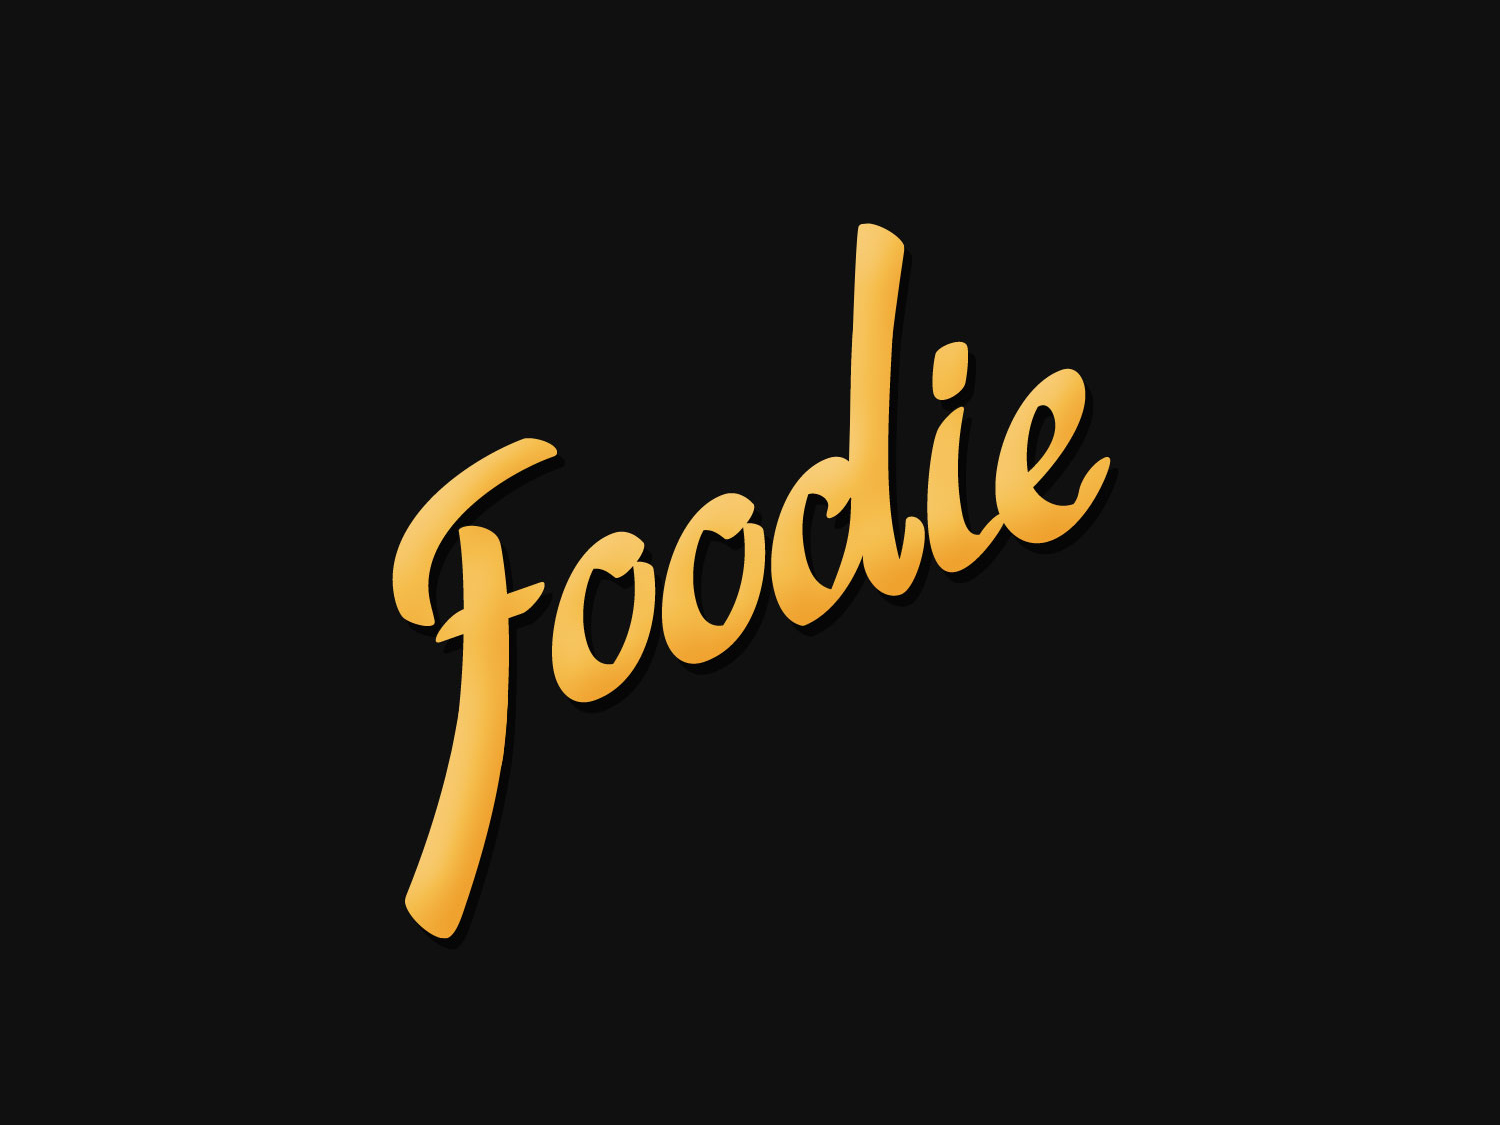 Foodie by Manish Kumar on Dribbble